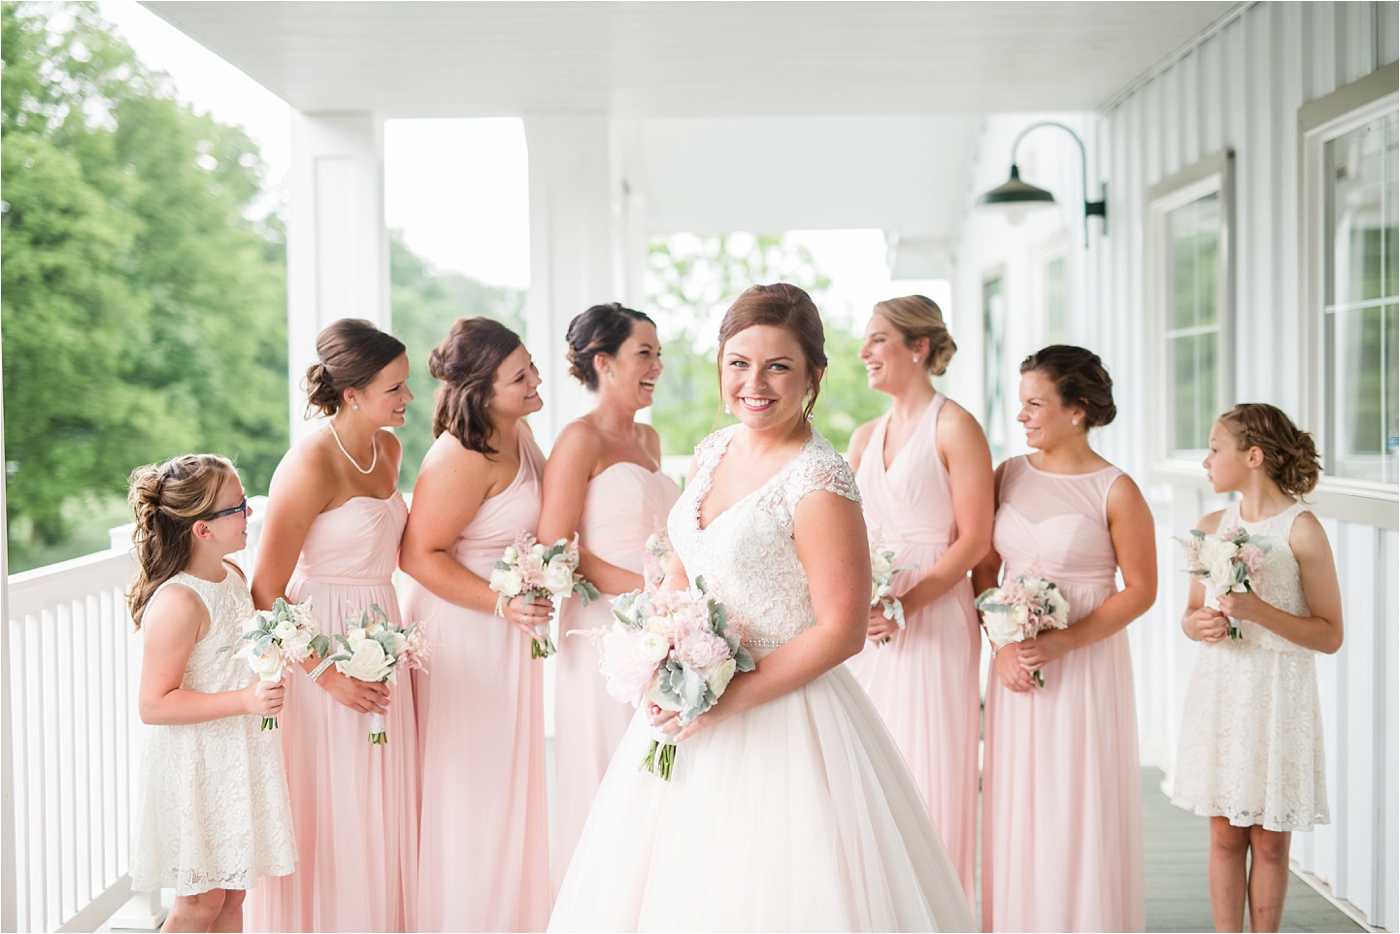 A Blush Outdoor wedding at Irongate Equestrian | KariMe Photography_0070